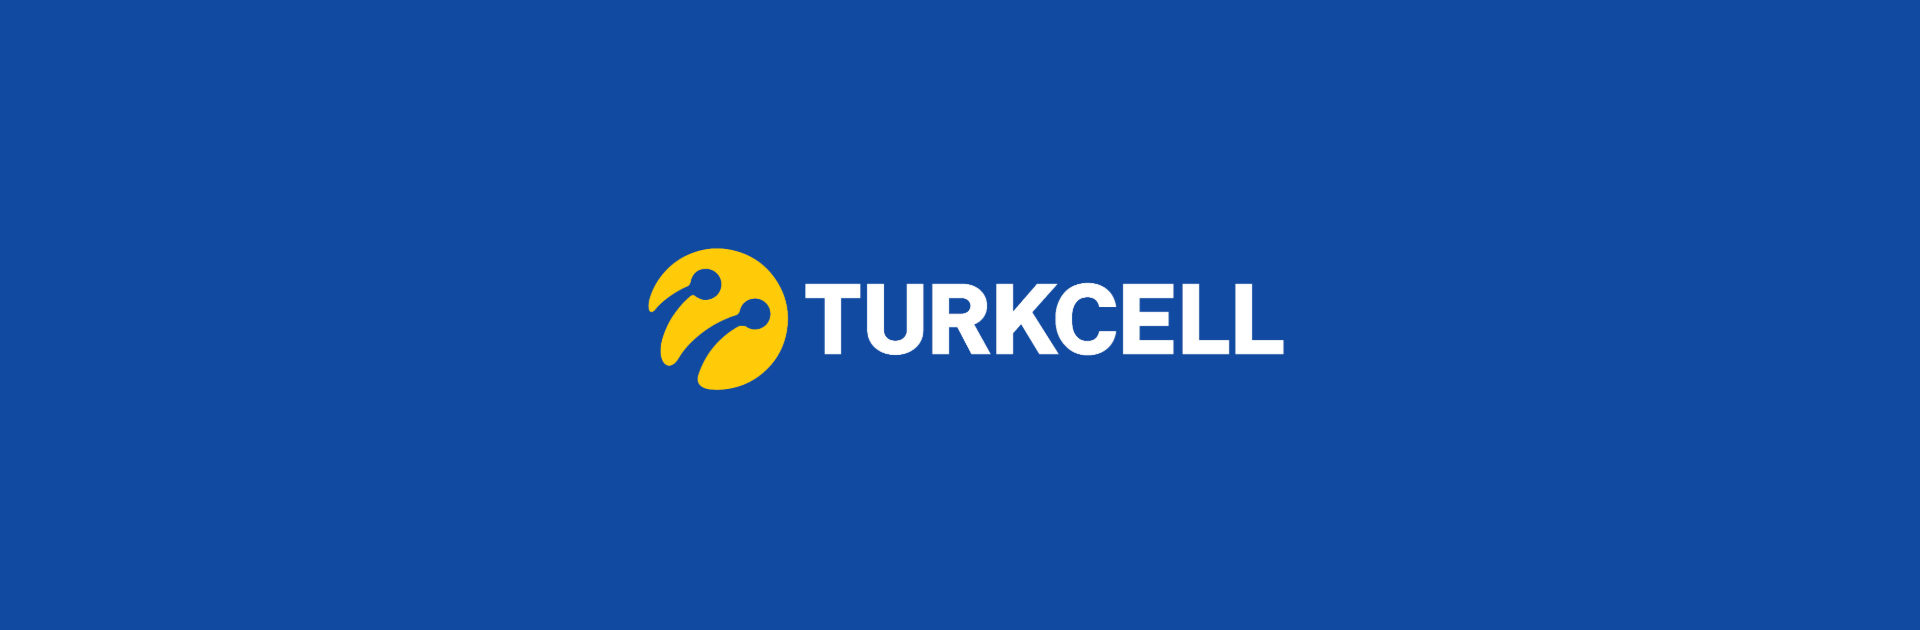 Turkcell Attains Excellence in Omni-Channel Customer Experience with SAP 